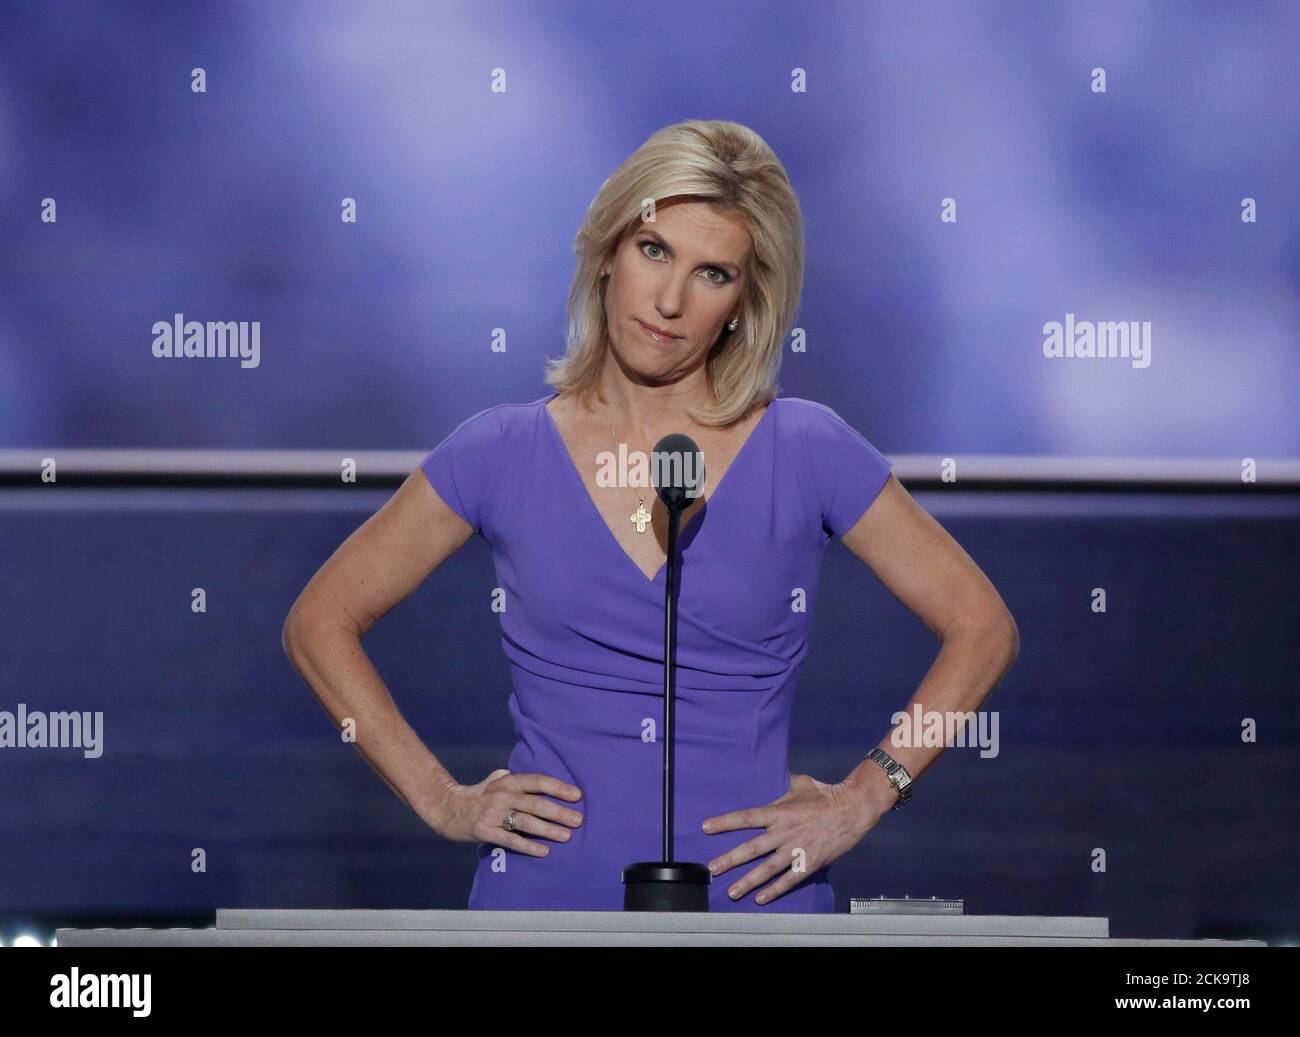 Conservative political commentator Laura Ingraham speaks during the third session of the Republican National Convention in Cleveland, Ohio, U.S. July 20, 2016.  REUTERS/Mike Segar Stock Photo